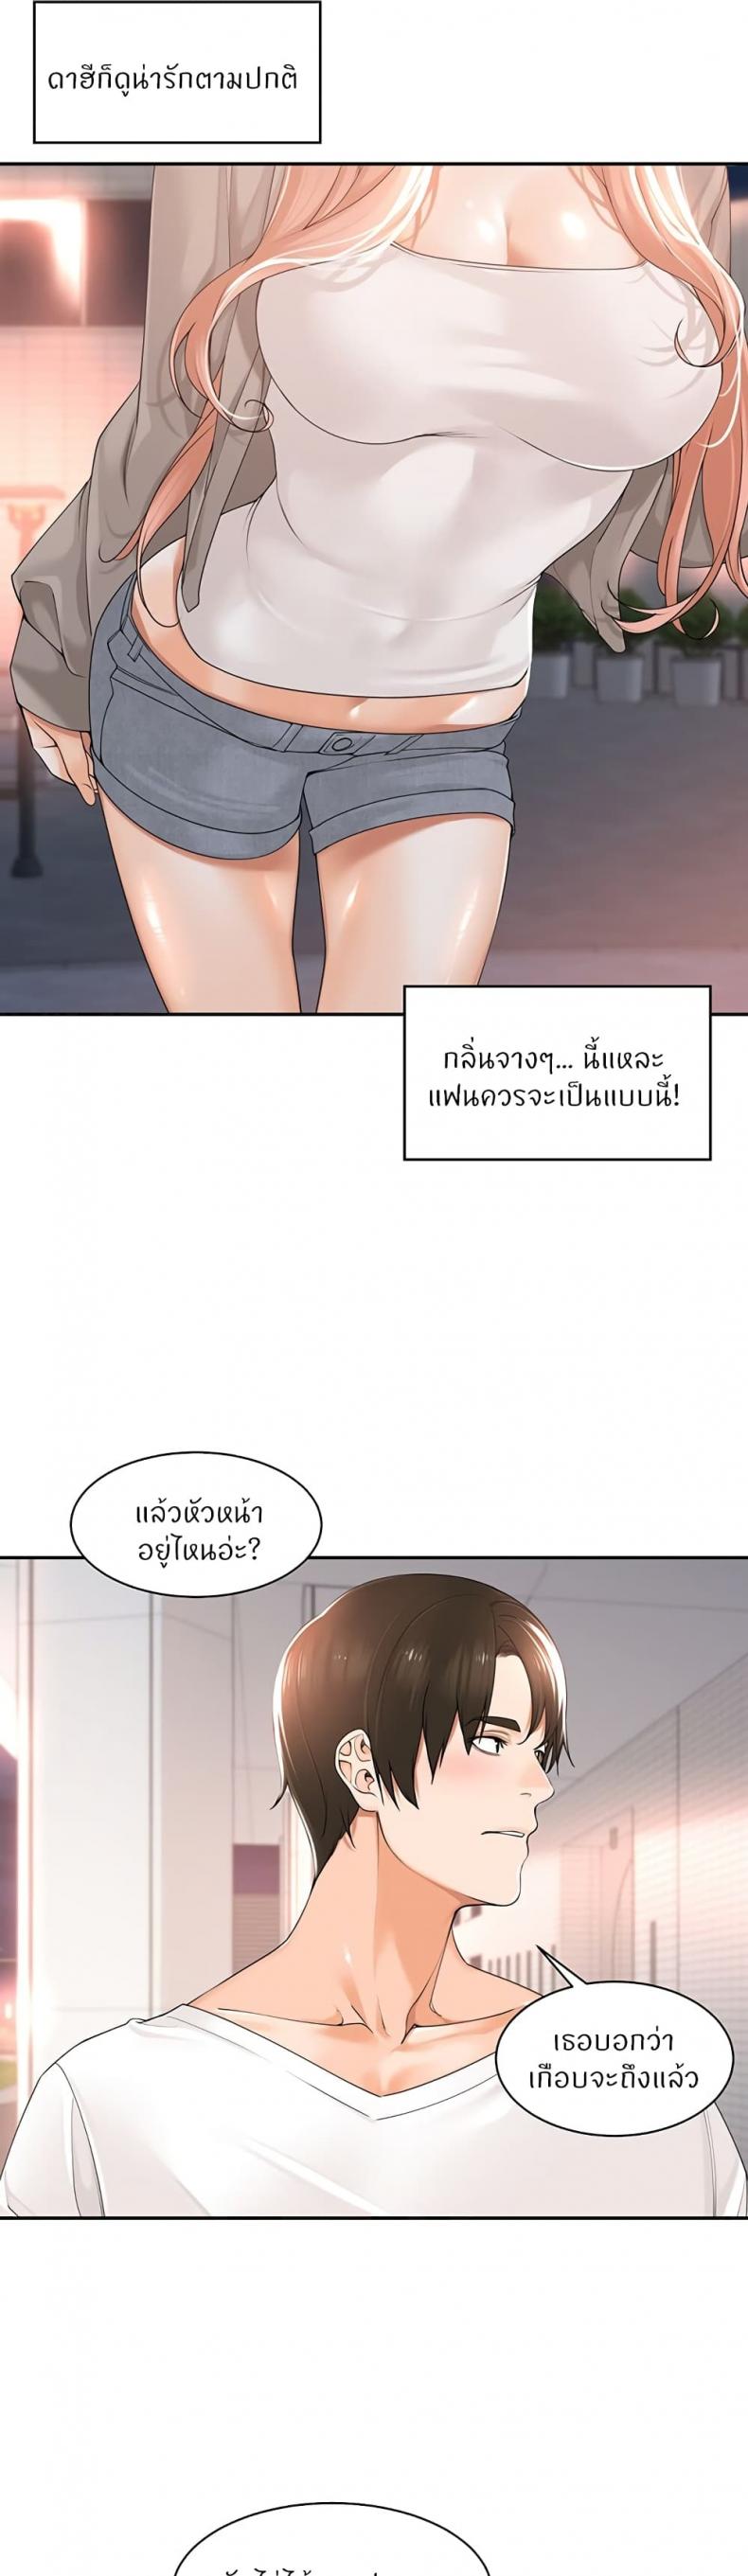 Manager, Please Scold Me 17 ภาพที่ 27